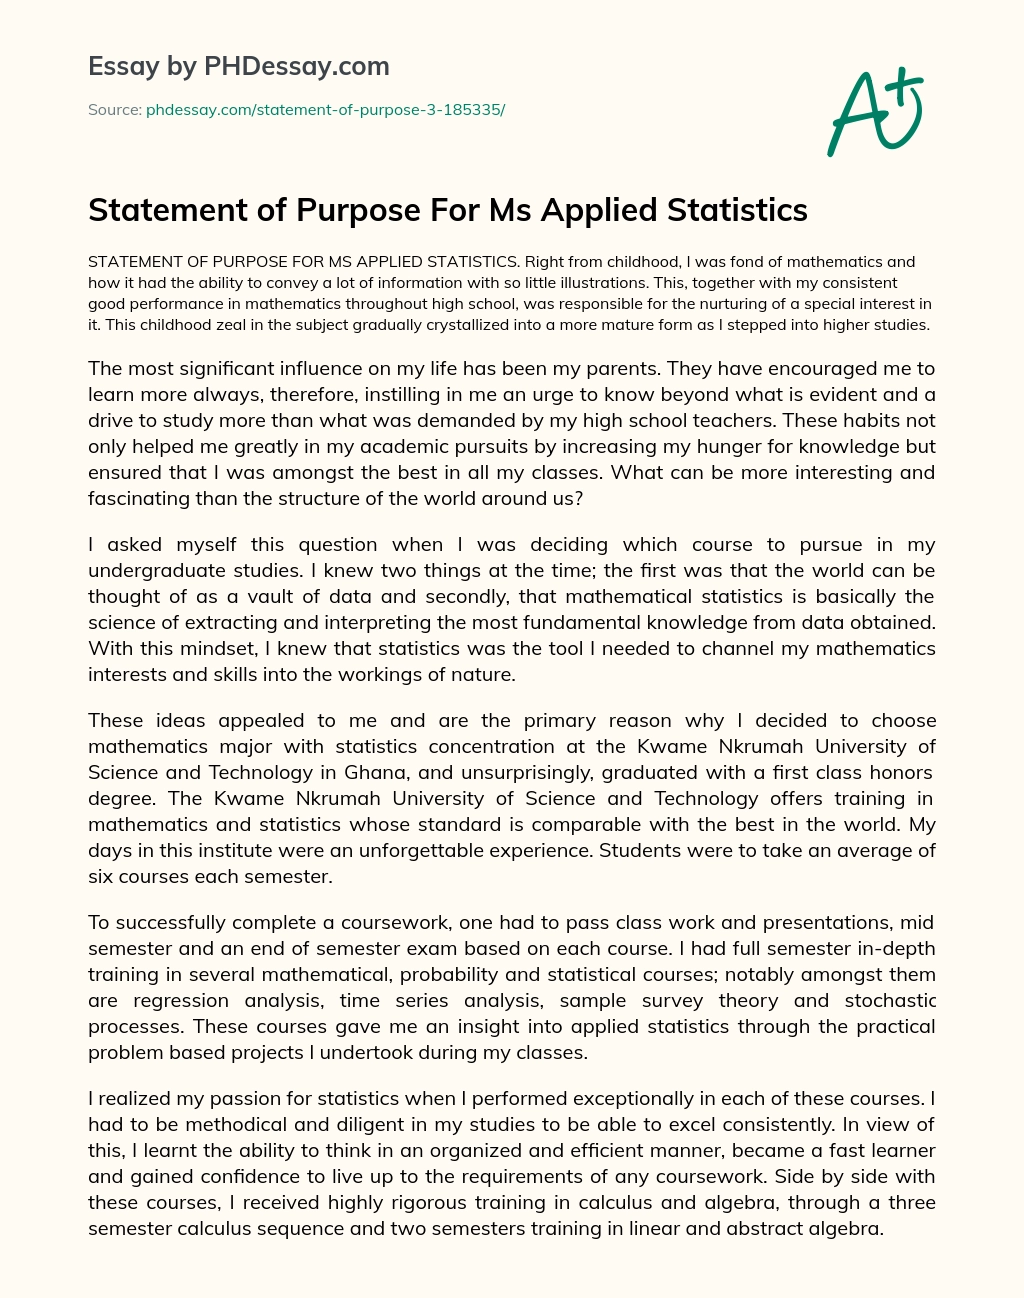 Statement of Purpose For Ms Applied Statistics - PHDessay.com